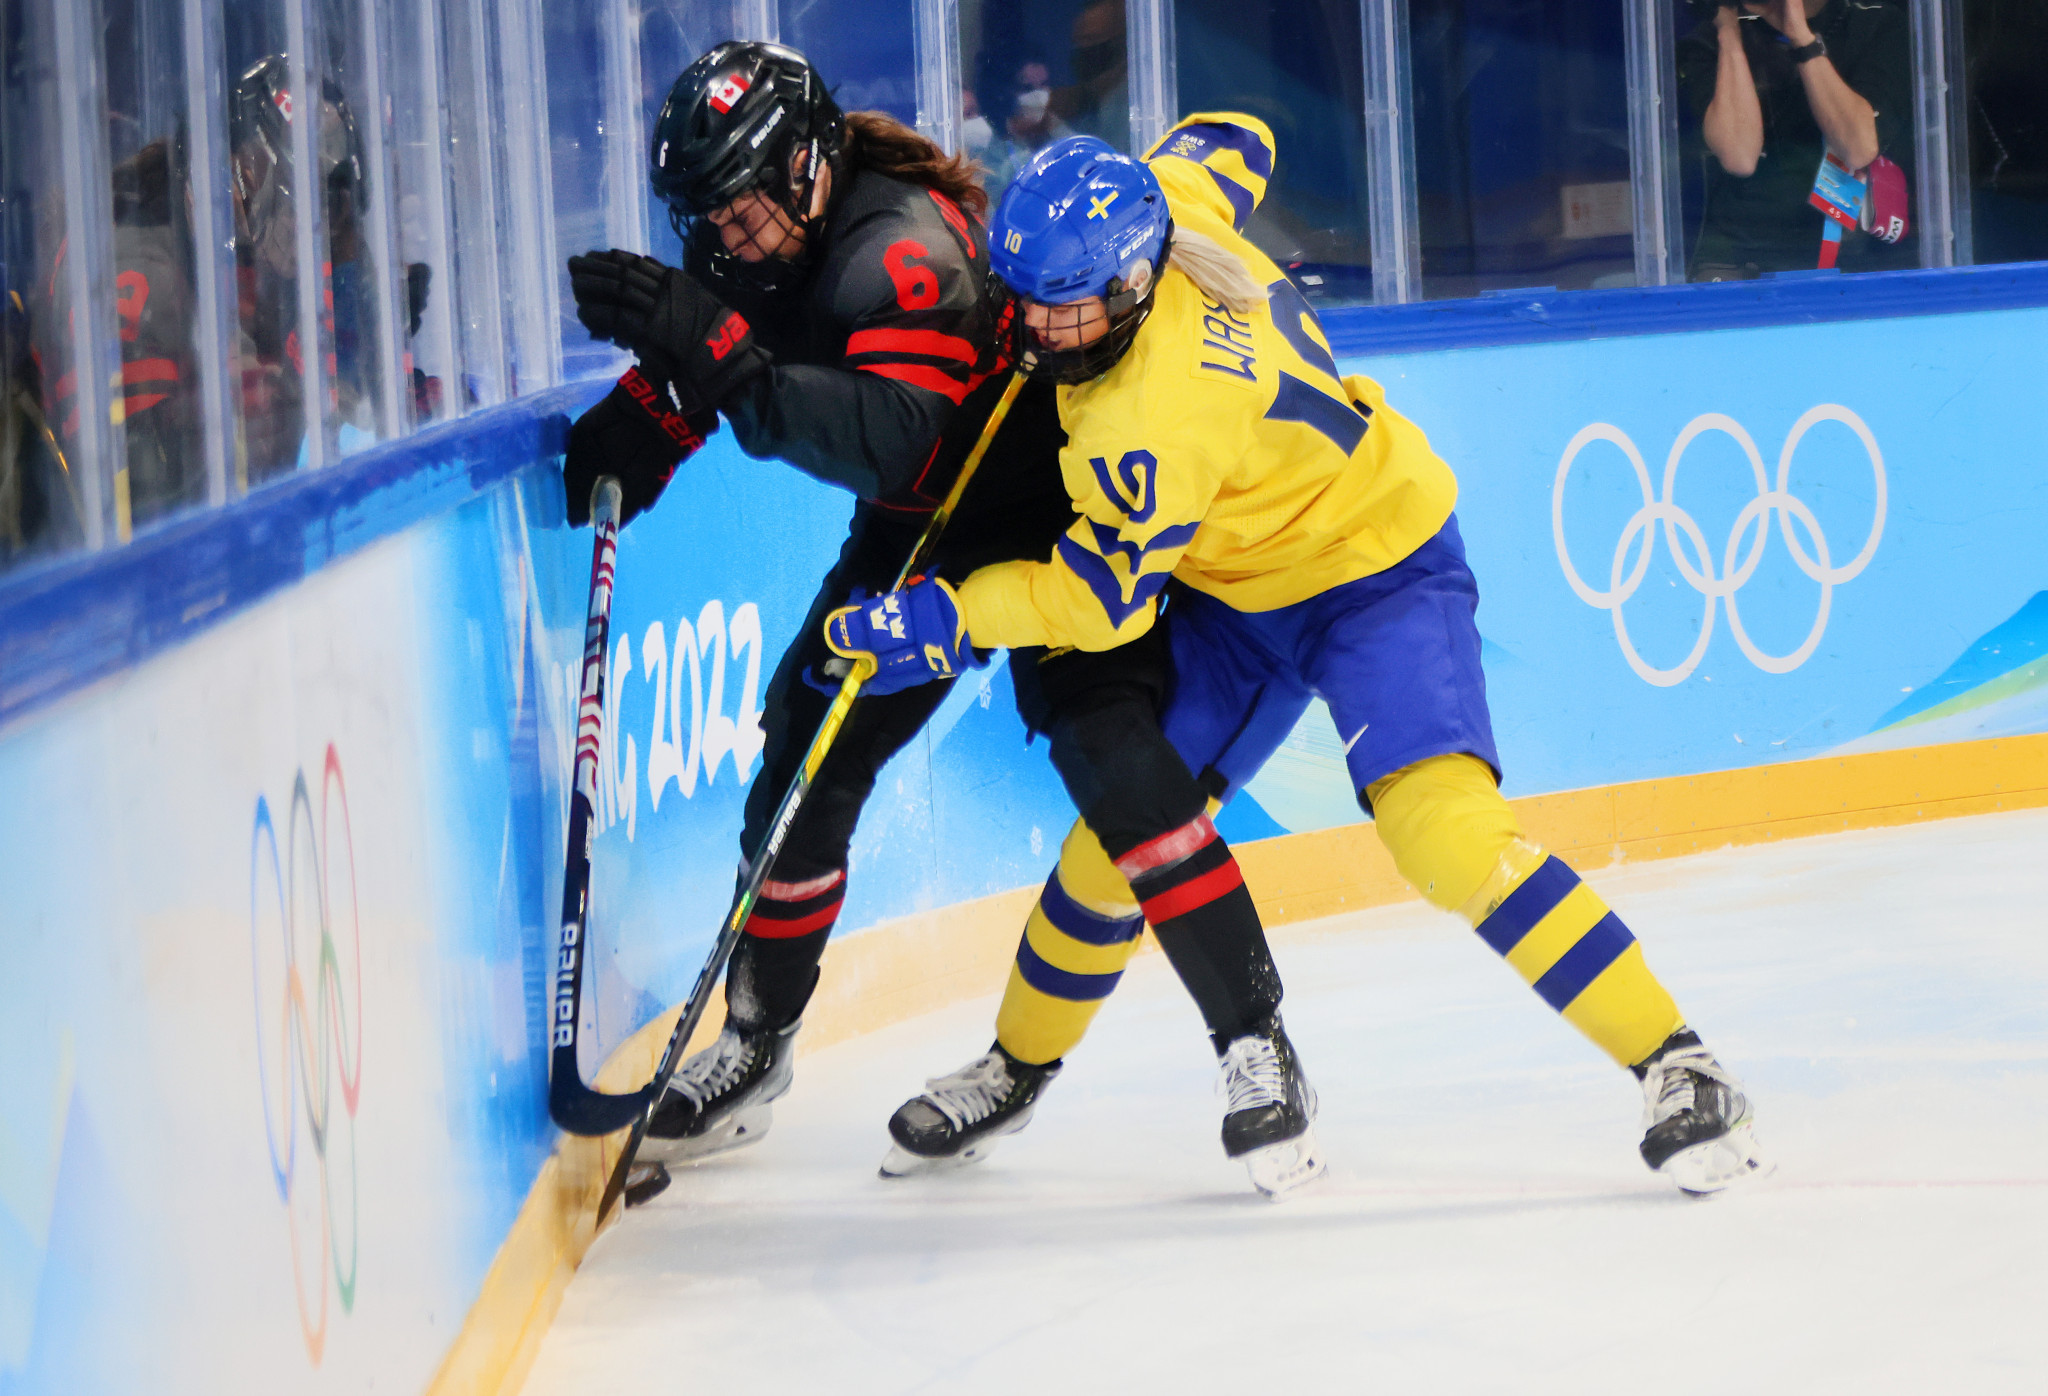 The women's ice hockey competition has reached the quarter-final stage ©Getty Images